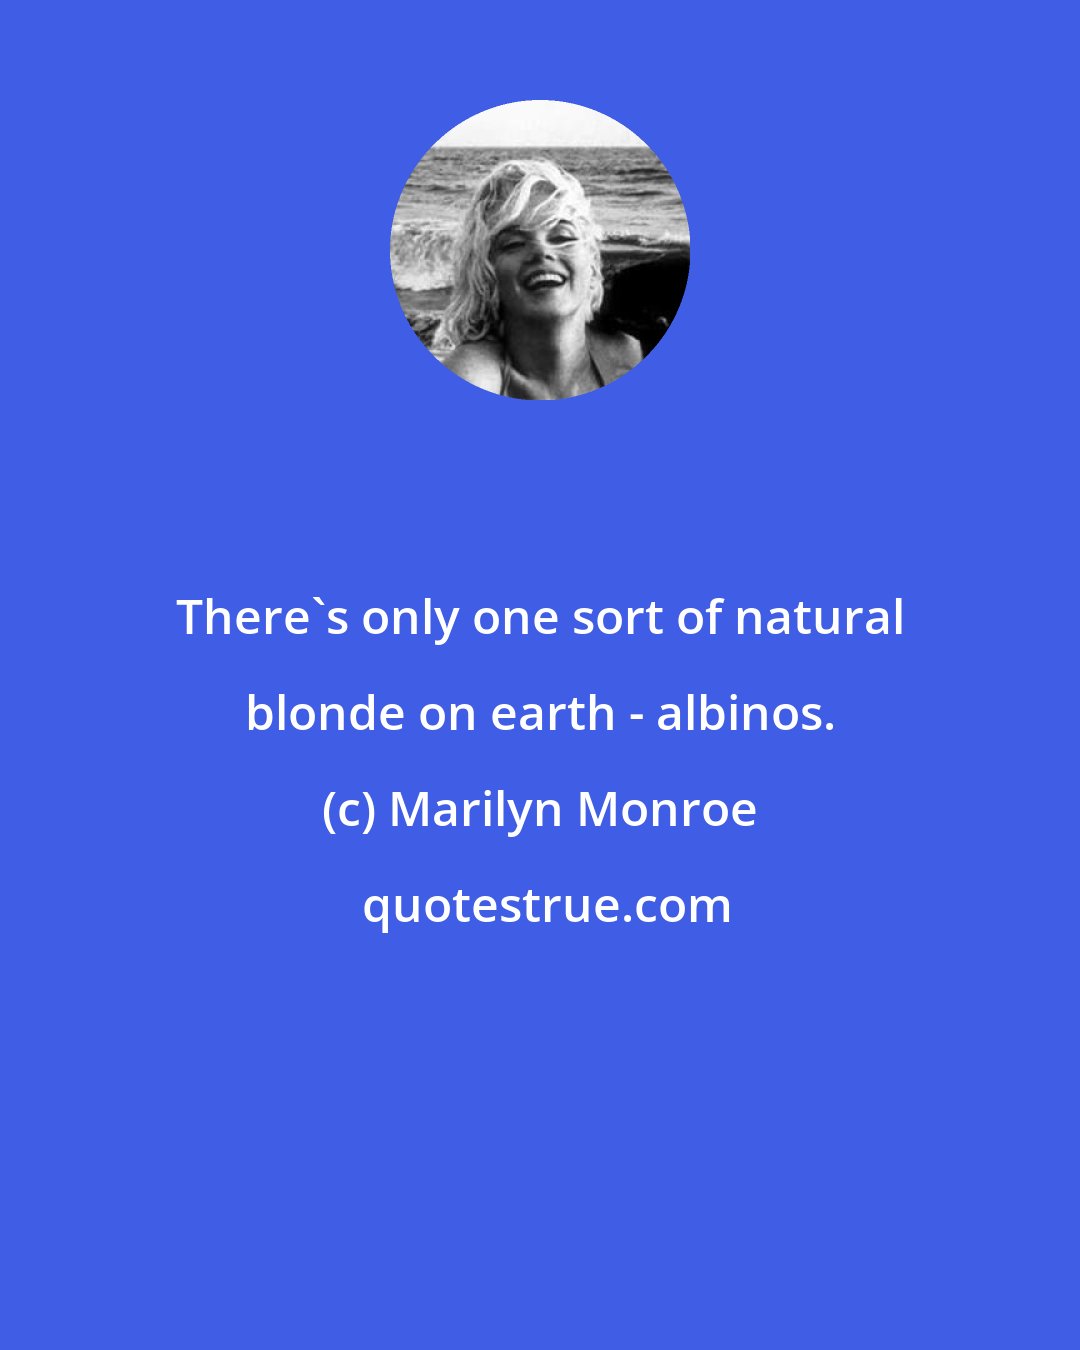 Marilyn Monroe: There's only one sort of natural blonde on earth - albinos.